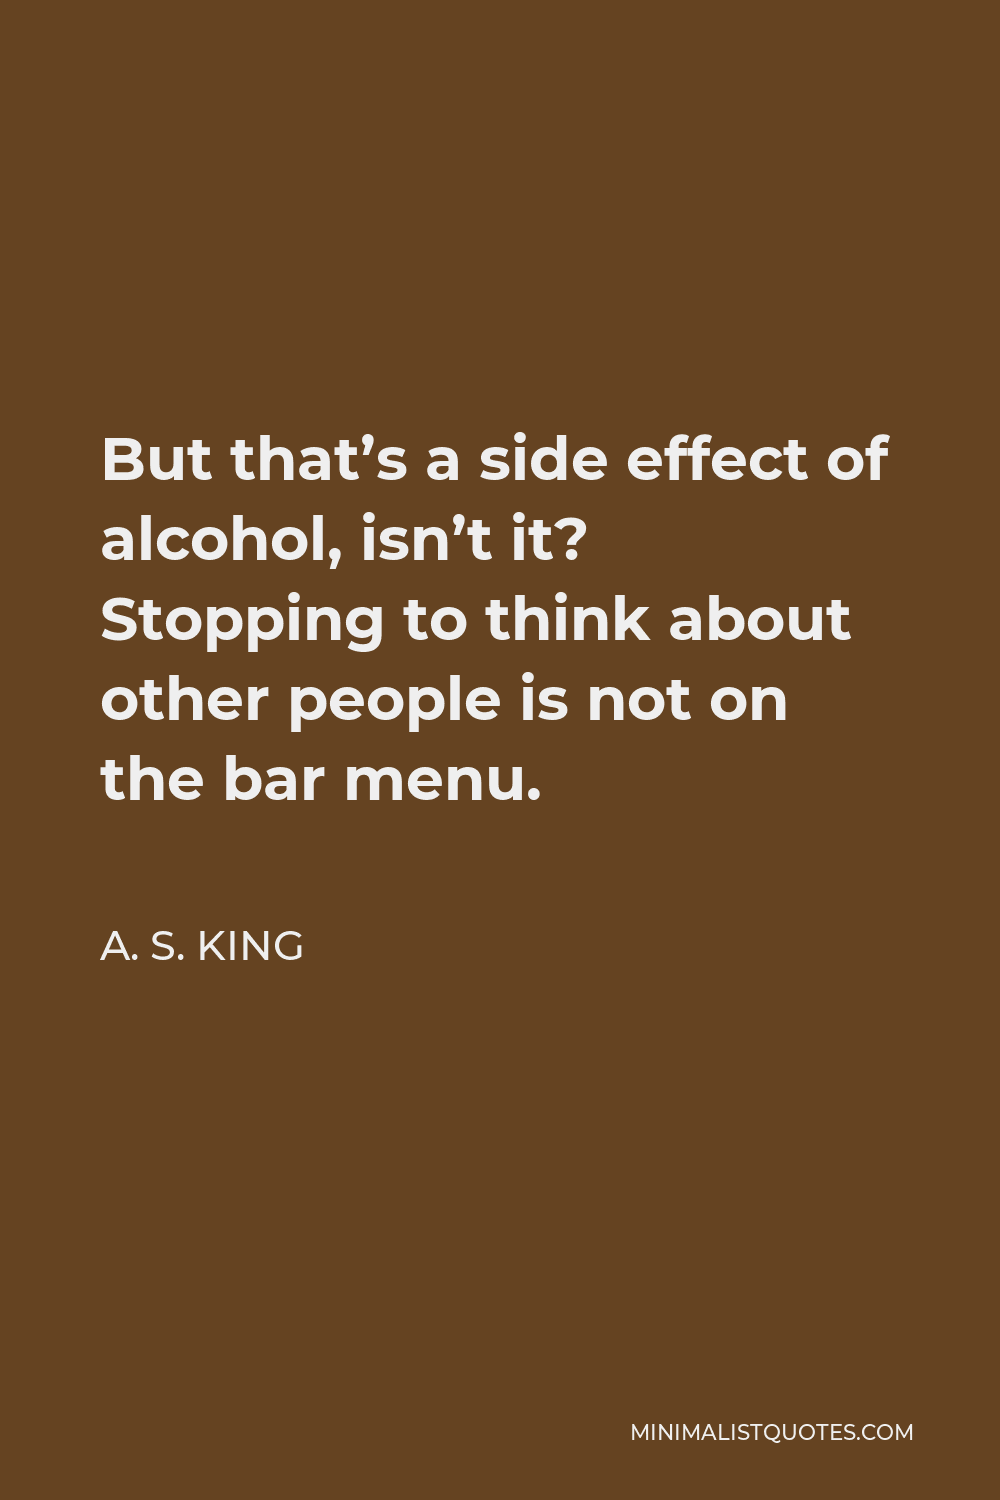 A. S. King Quote - But that’s a side effect of alcohol, isn’t it? Stopping to think about other people is not on the bar menu.